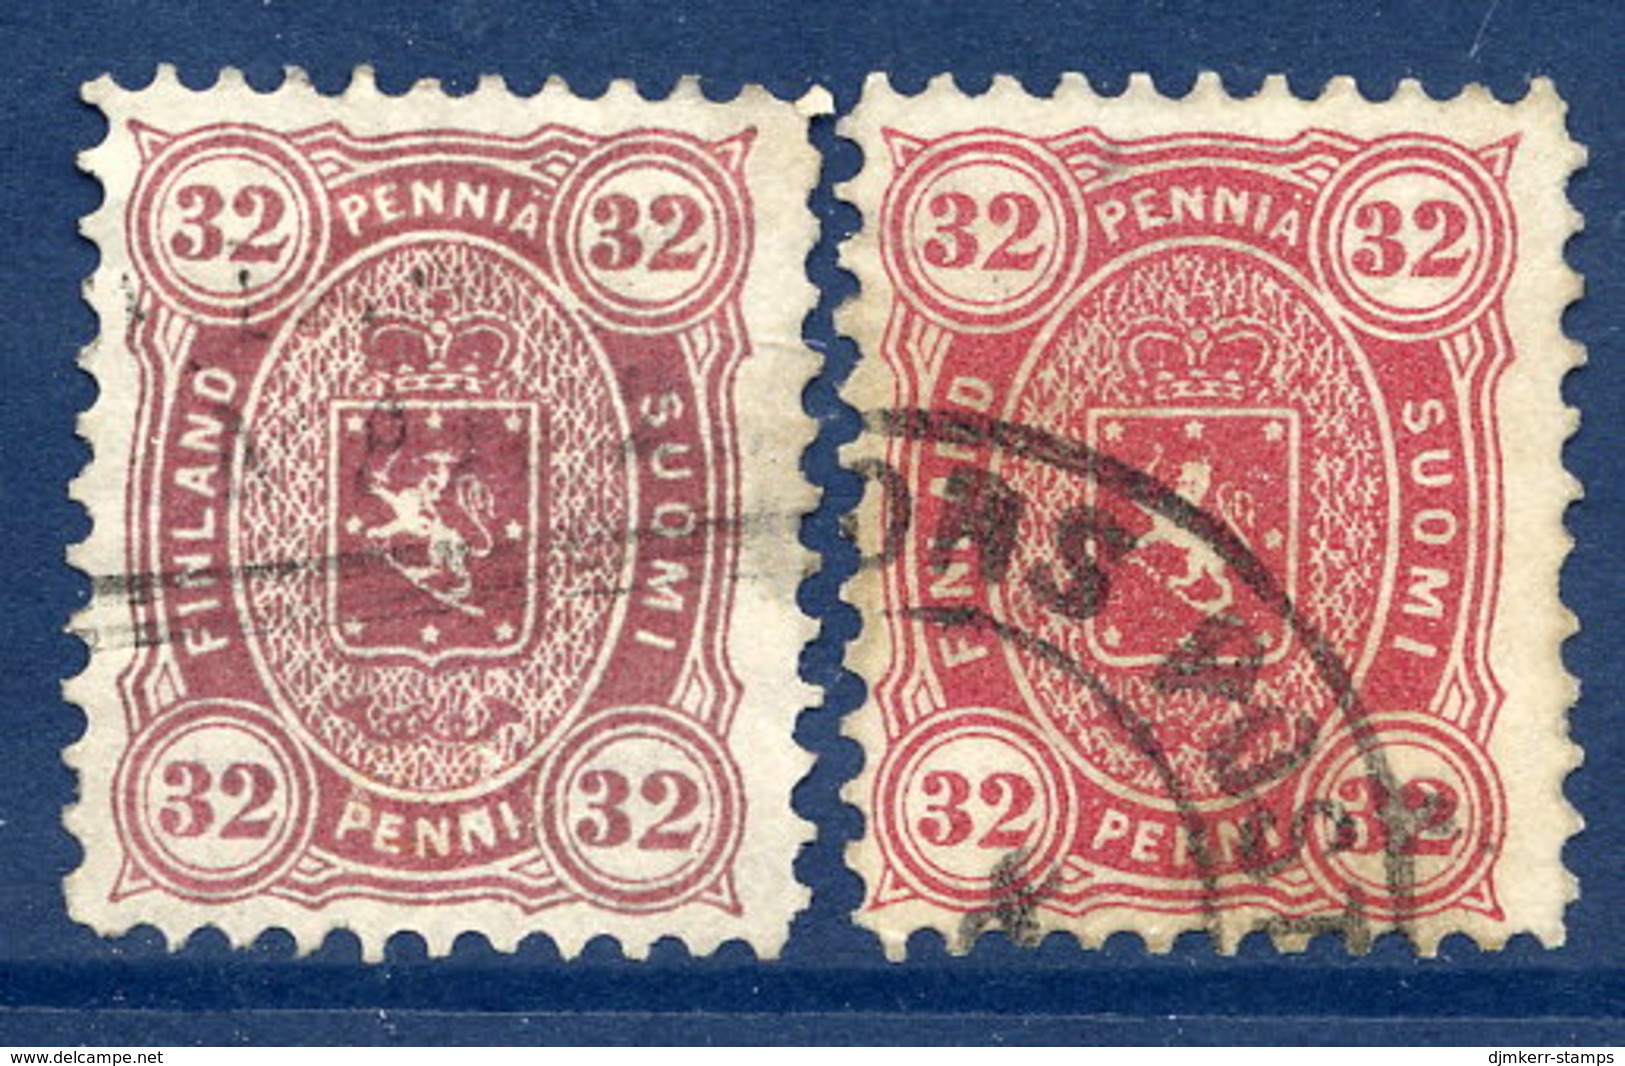 FINLAND 1875  32p Two Shades Perforated 11  Used.  Michel 18A, SG 78-79 - Used Stamps